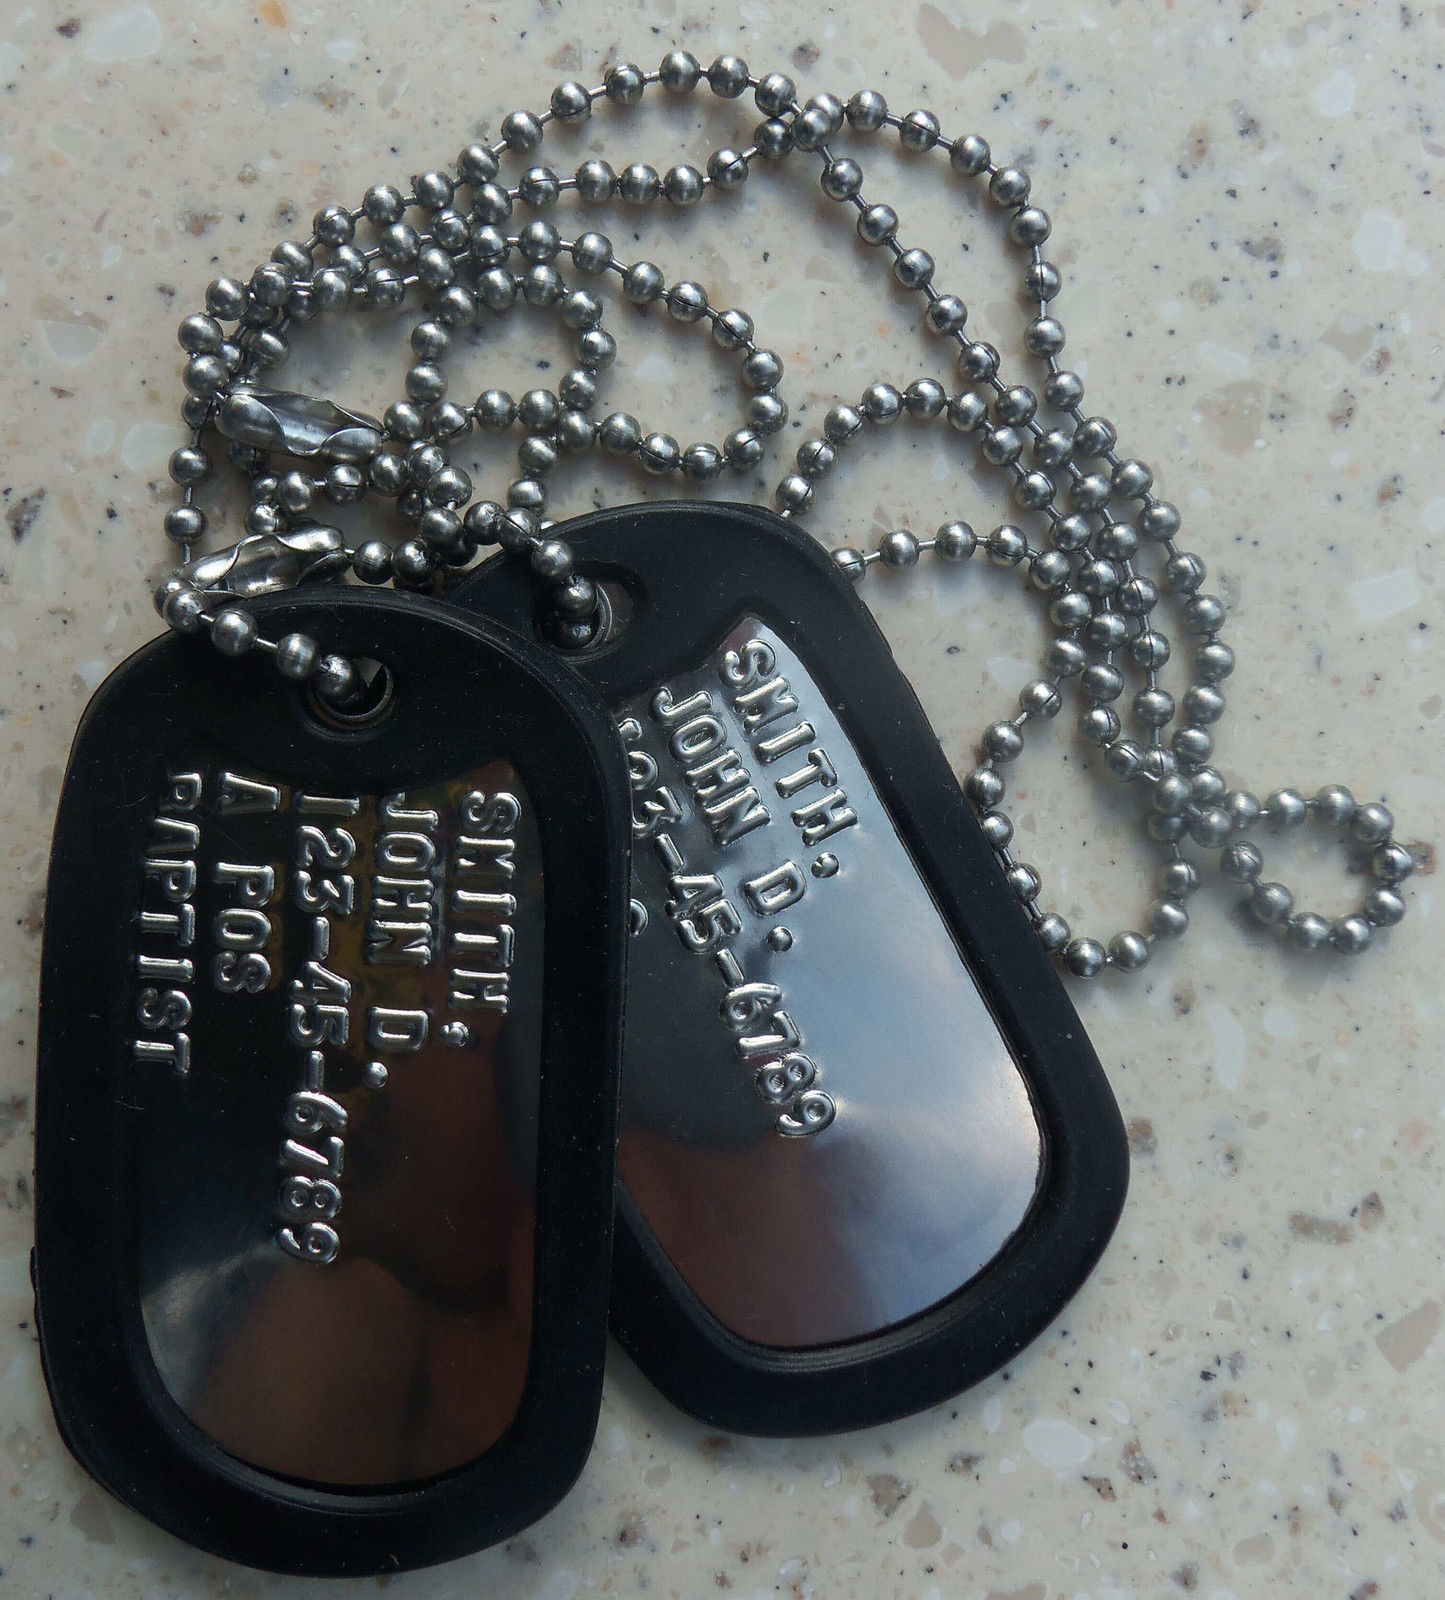 replace army dog tags